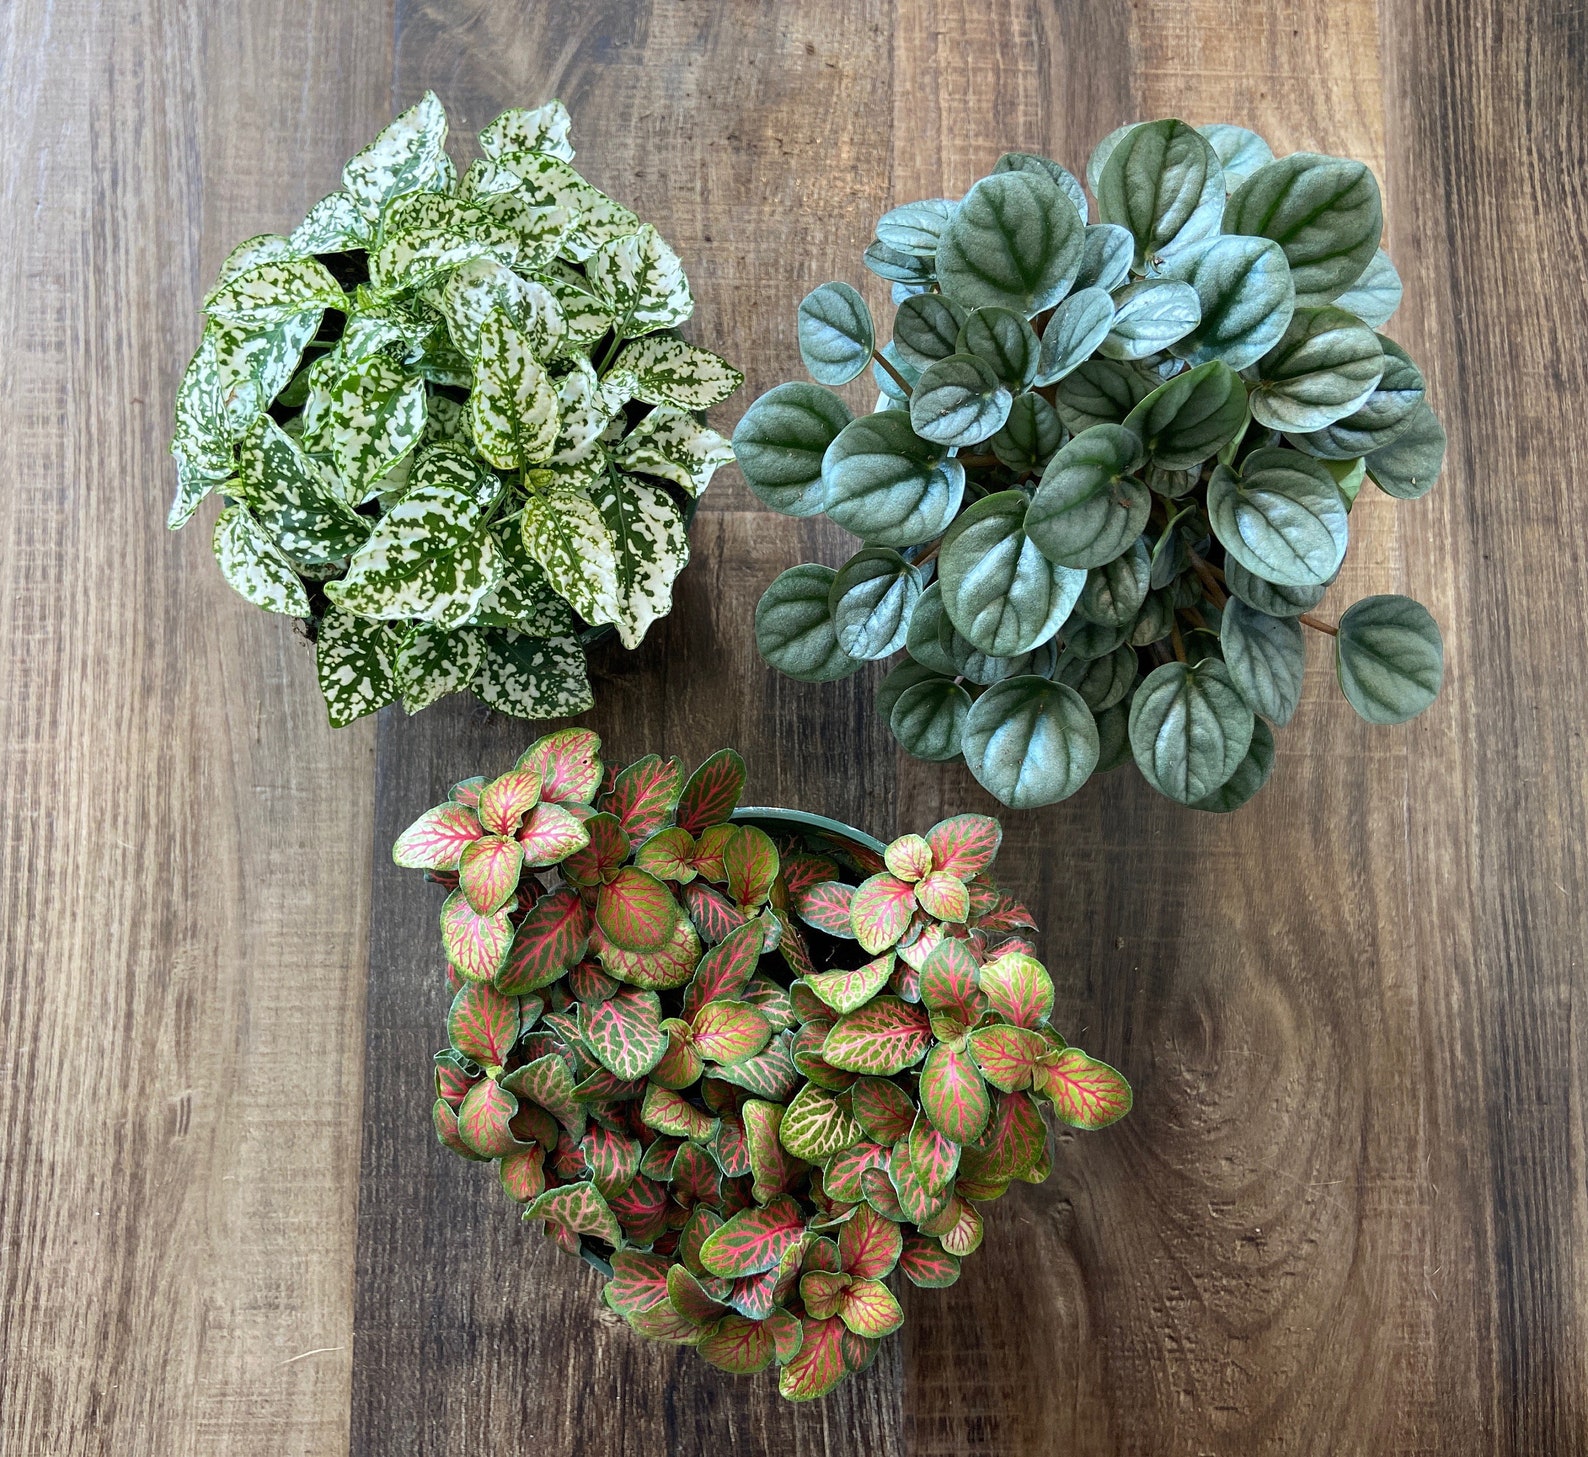  Pet Safe Houseplants for Small Space